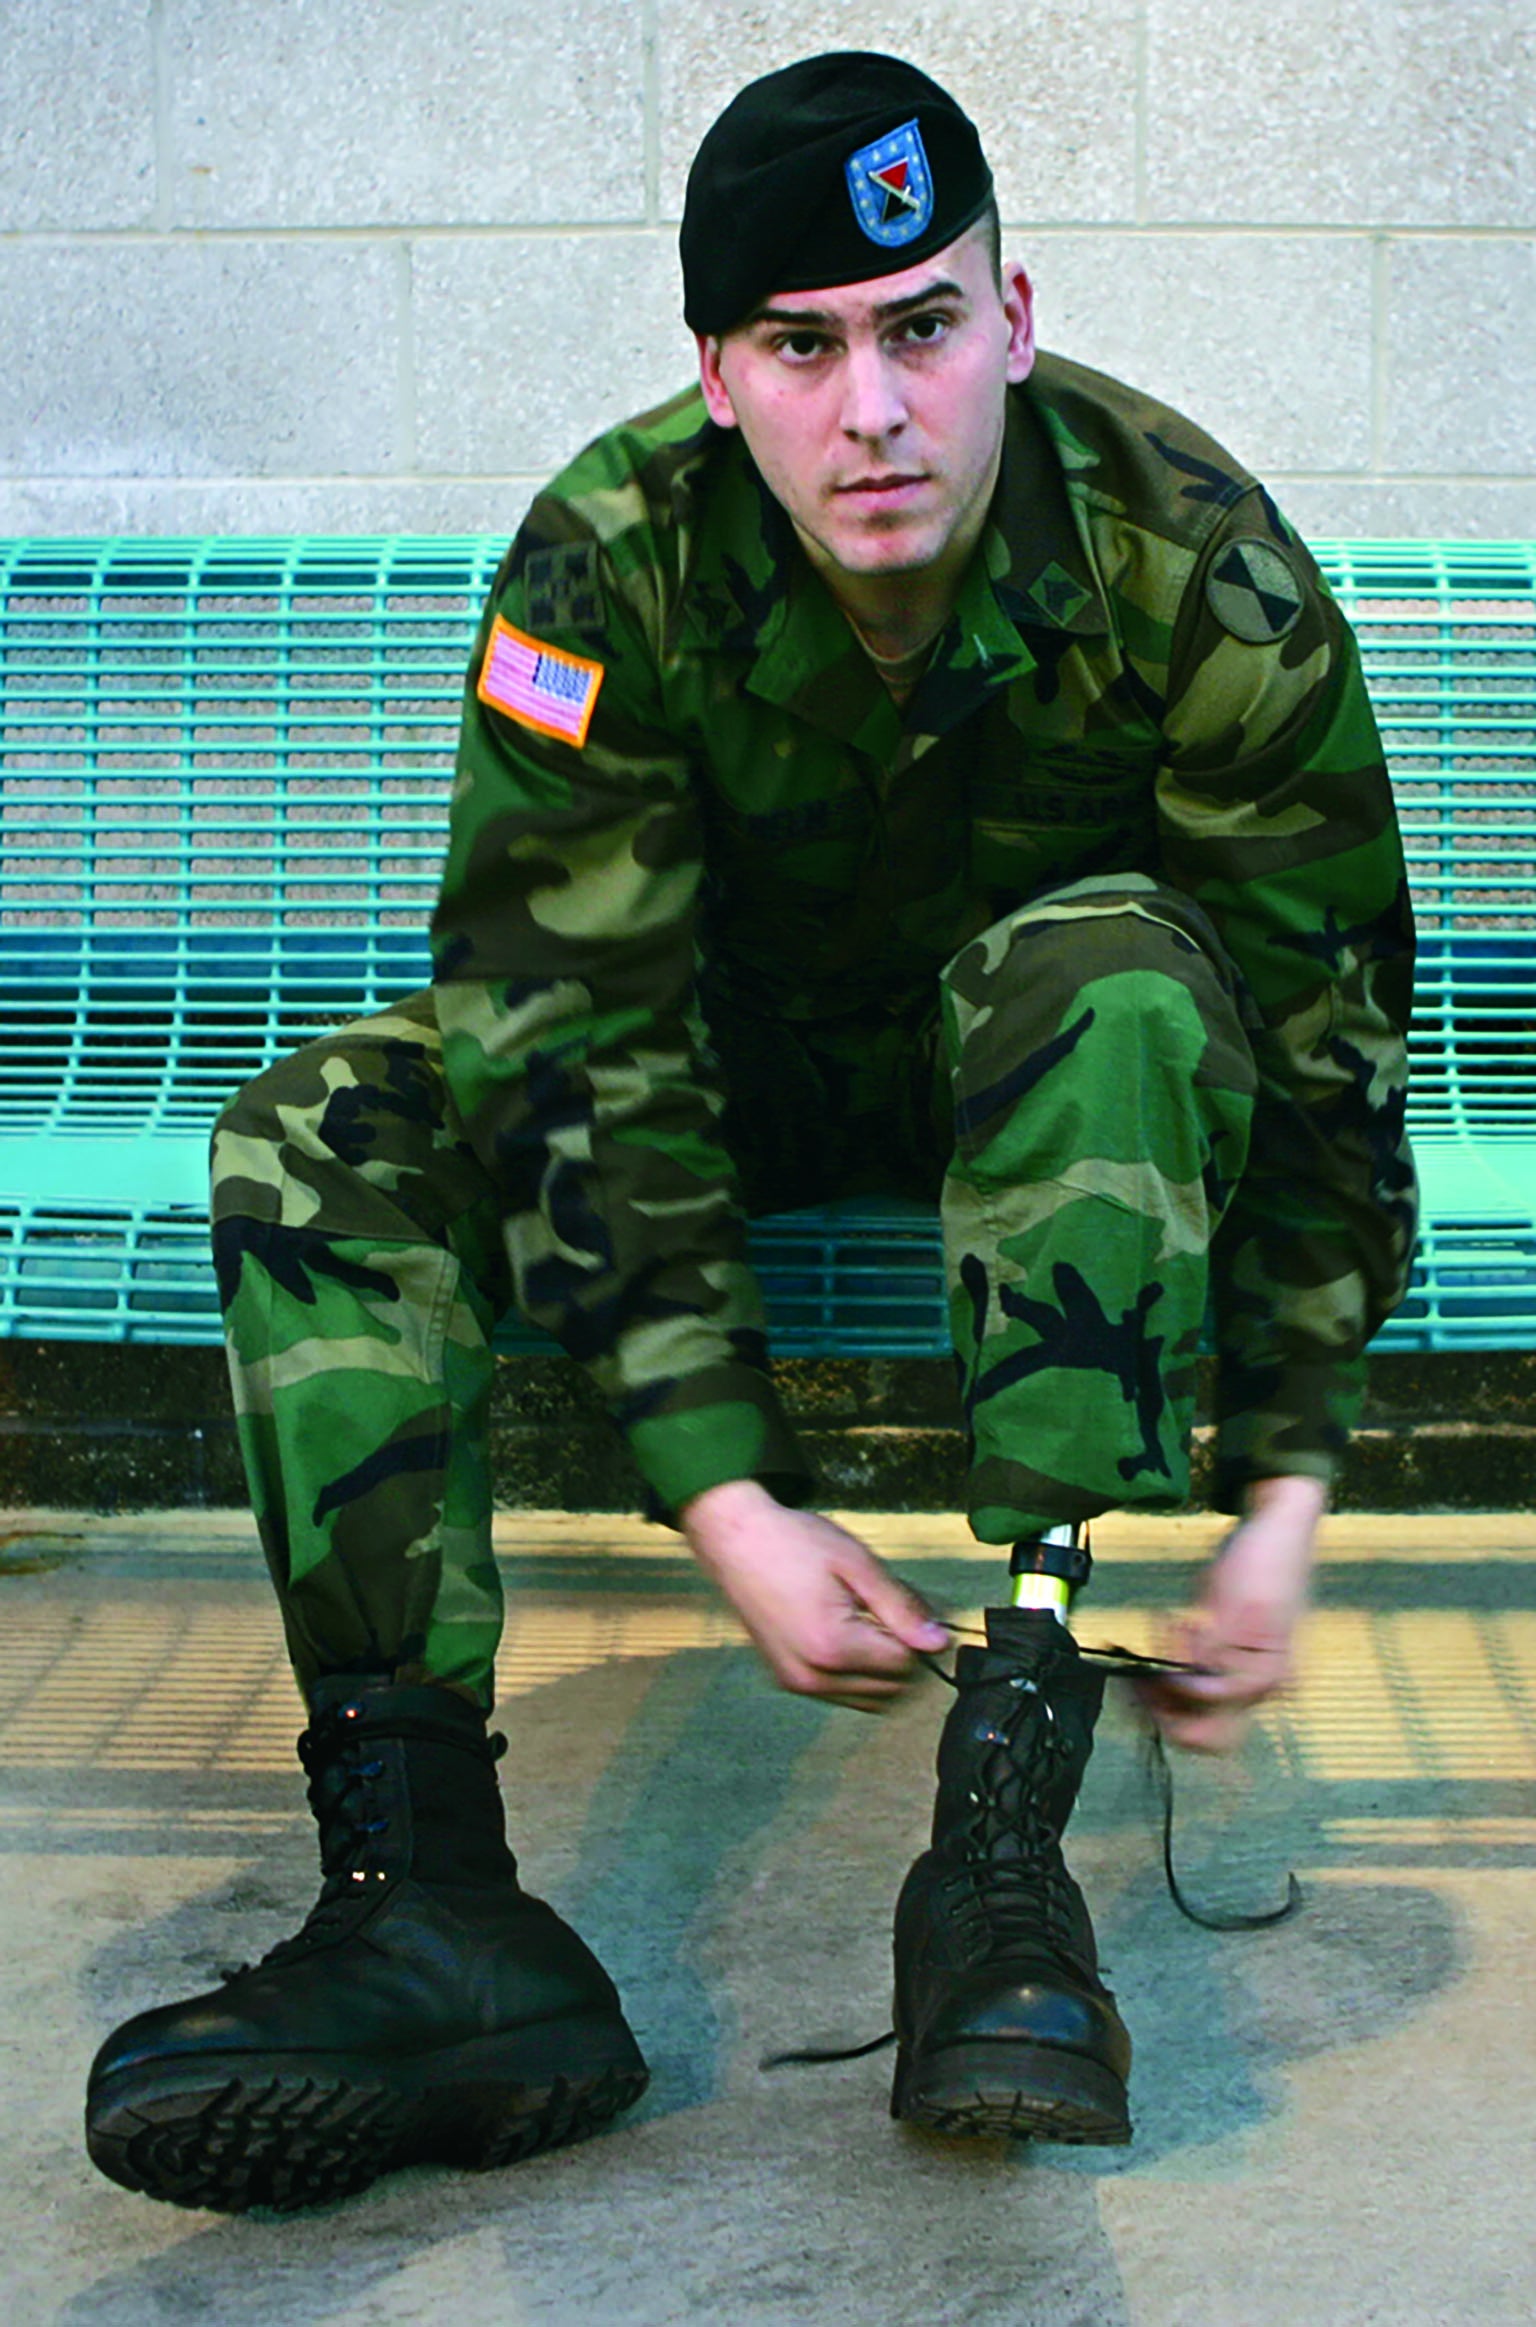 Soldier tying up shoes of a prosthetic leg.